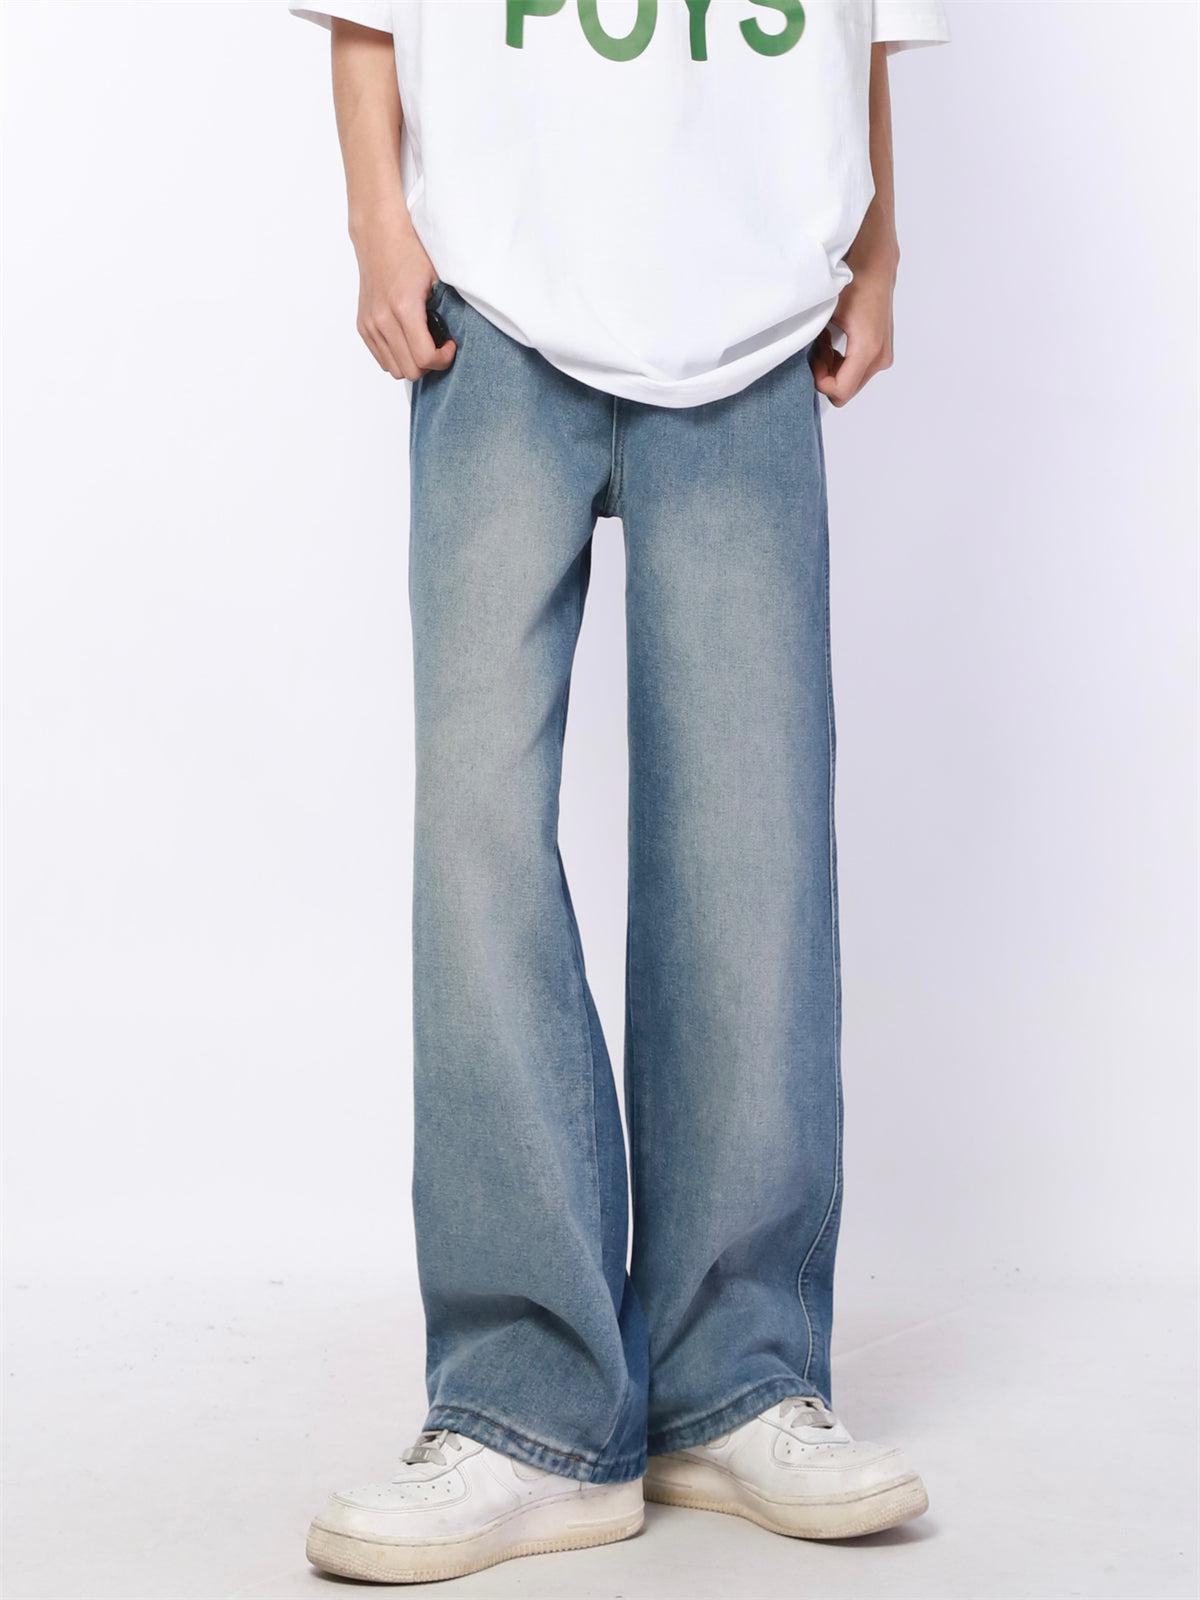 Made Extreme Gradient Washed Straight Jeans Korean Street Fashion Jeans By Made Extreme Shop Online at OH Vault